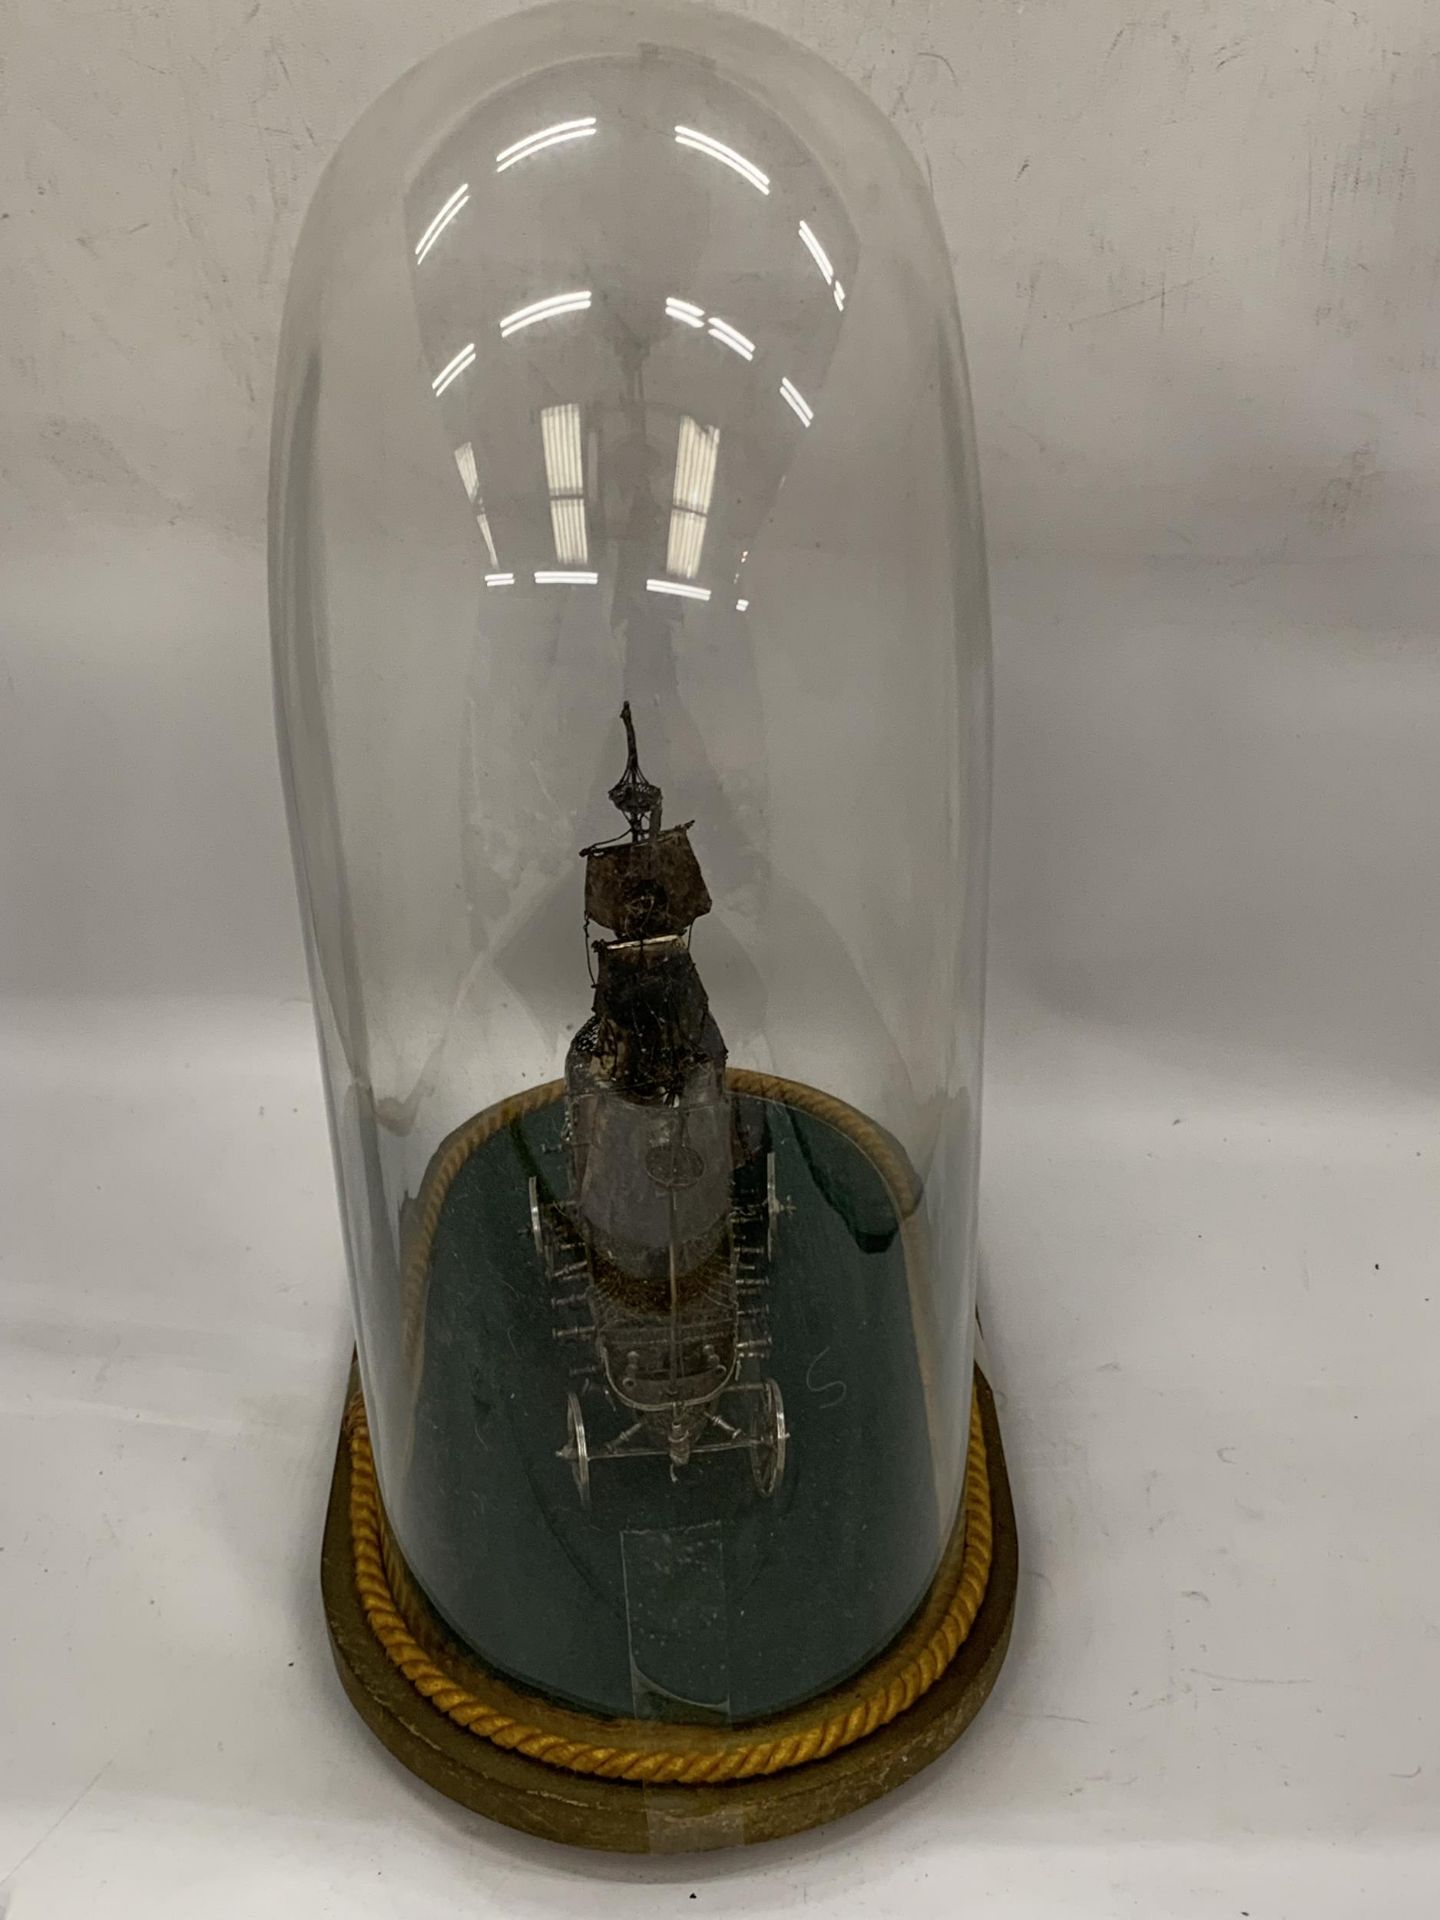 A VINTAGE WHITE METAL, POSSIBLY SILVER, BOAT MODEL IN VINTAGE GLASS DOME CASE, DOME HEIGHT 46CM - Image 3 of 4